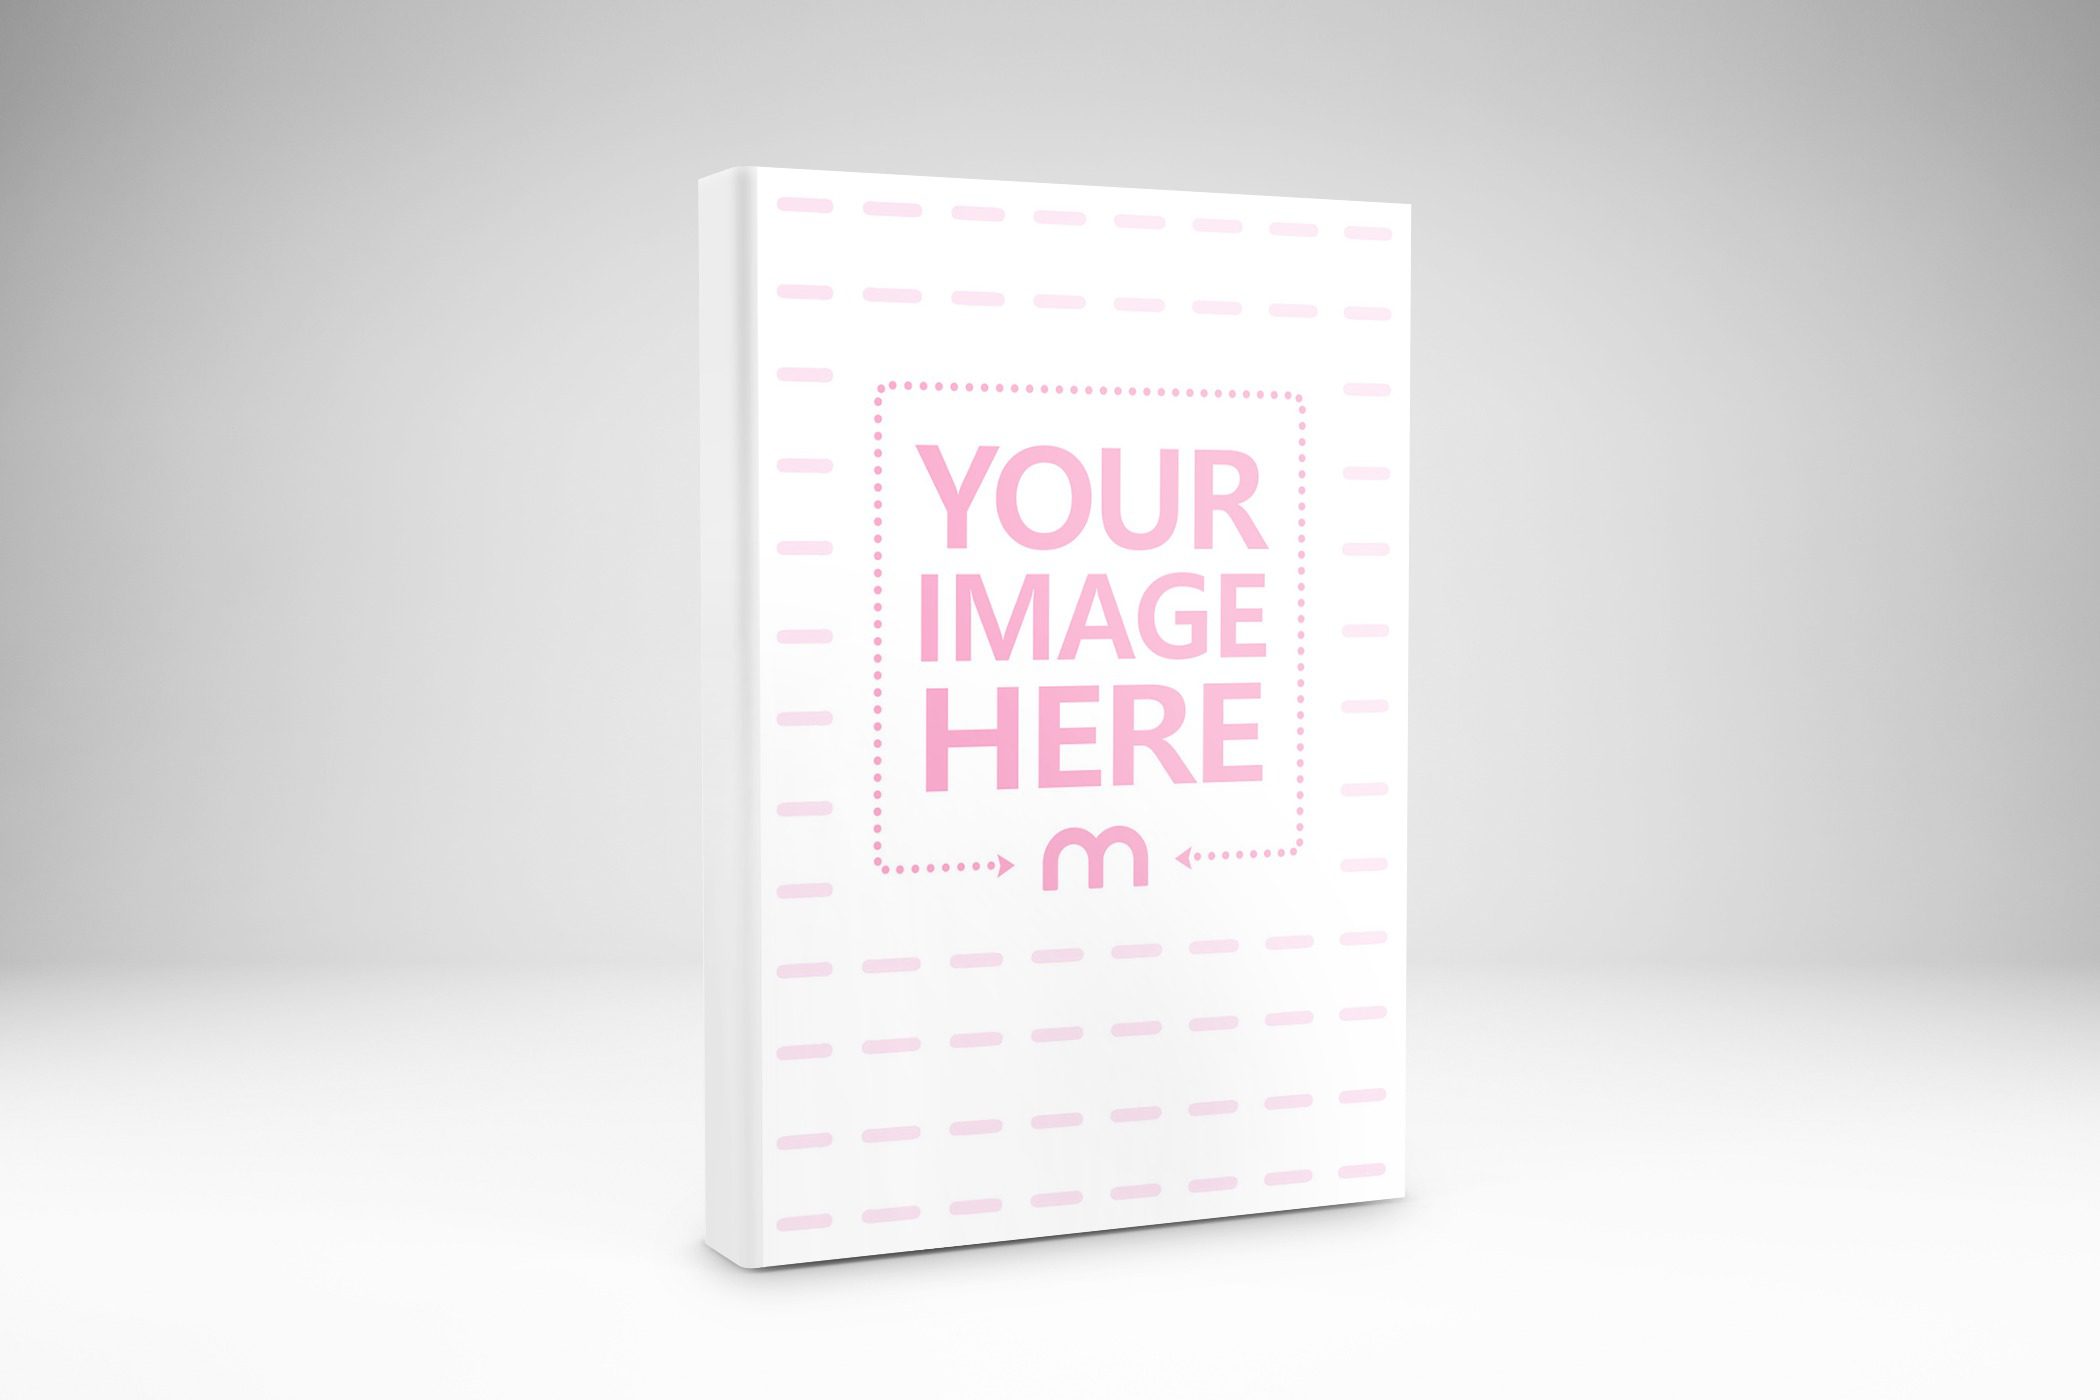 hardcover book and spine free online mockup generator